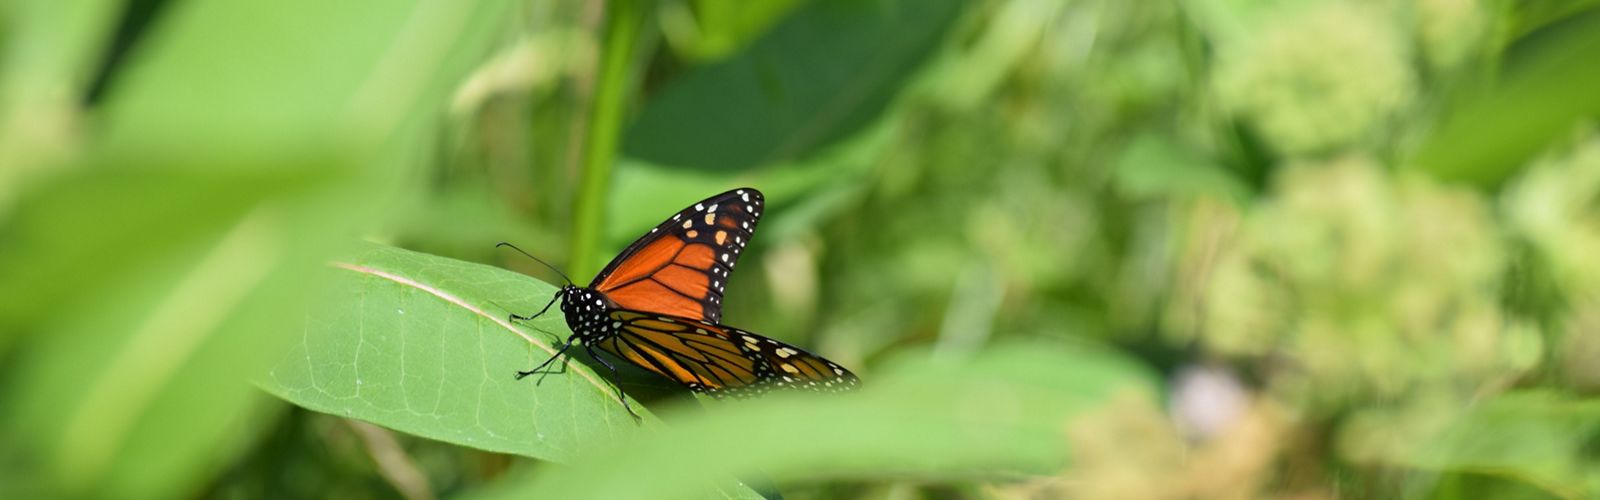 An orange and black monarch butterfly sitting on a green leaf, surrounded by greenery.